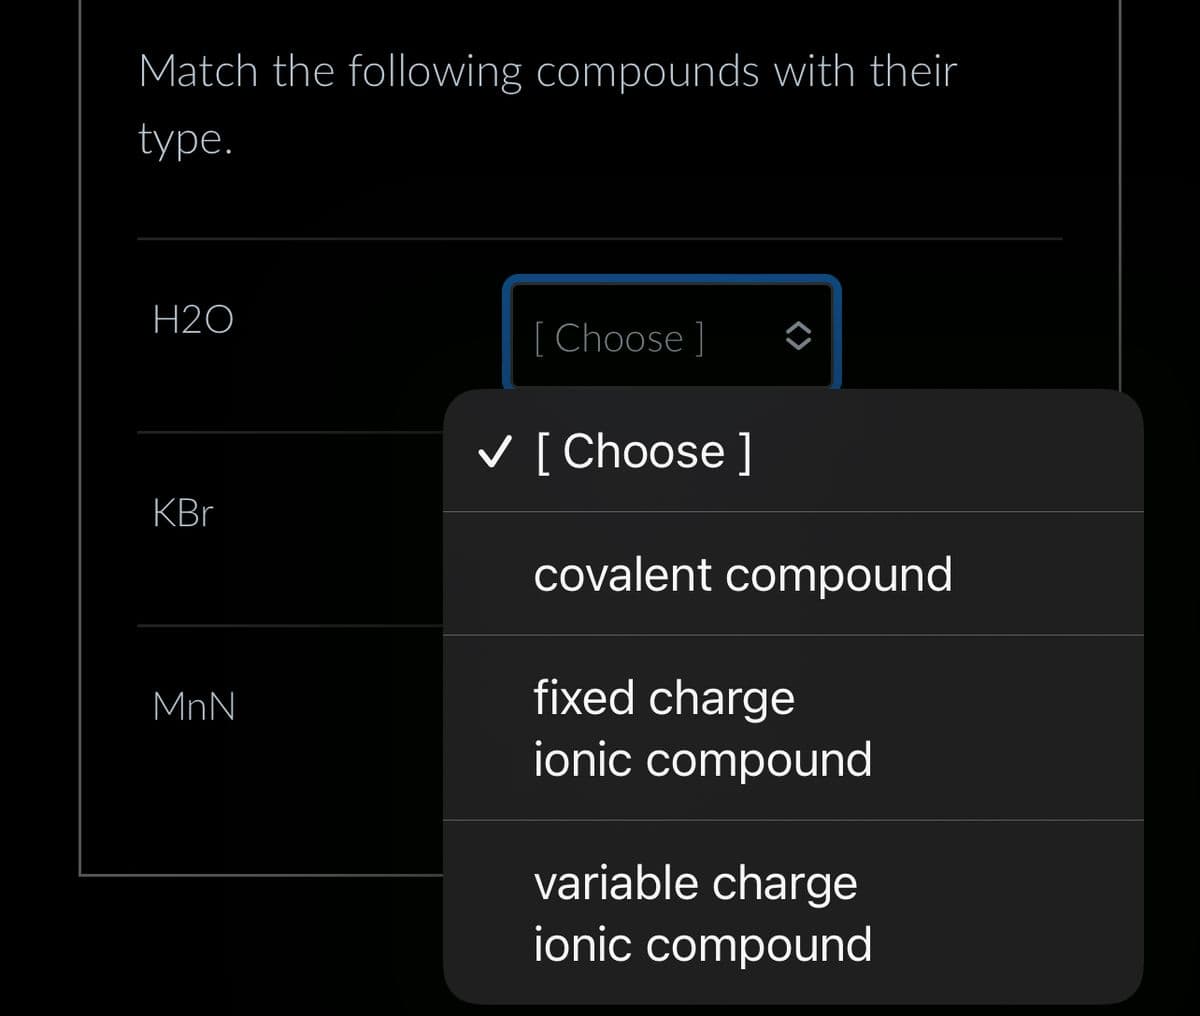 Match the following compounds with their
type.
H2O
KBr
MnN
Choose ]
✓ [Choose ]
covalent compound
fixed charge
ionic compound
variable charge
ionic compound